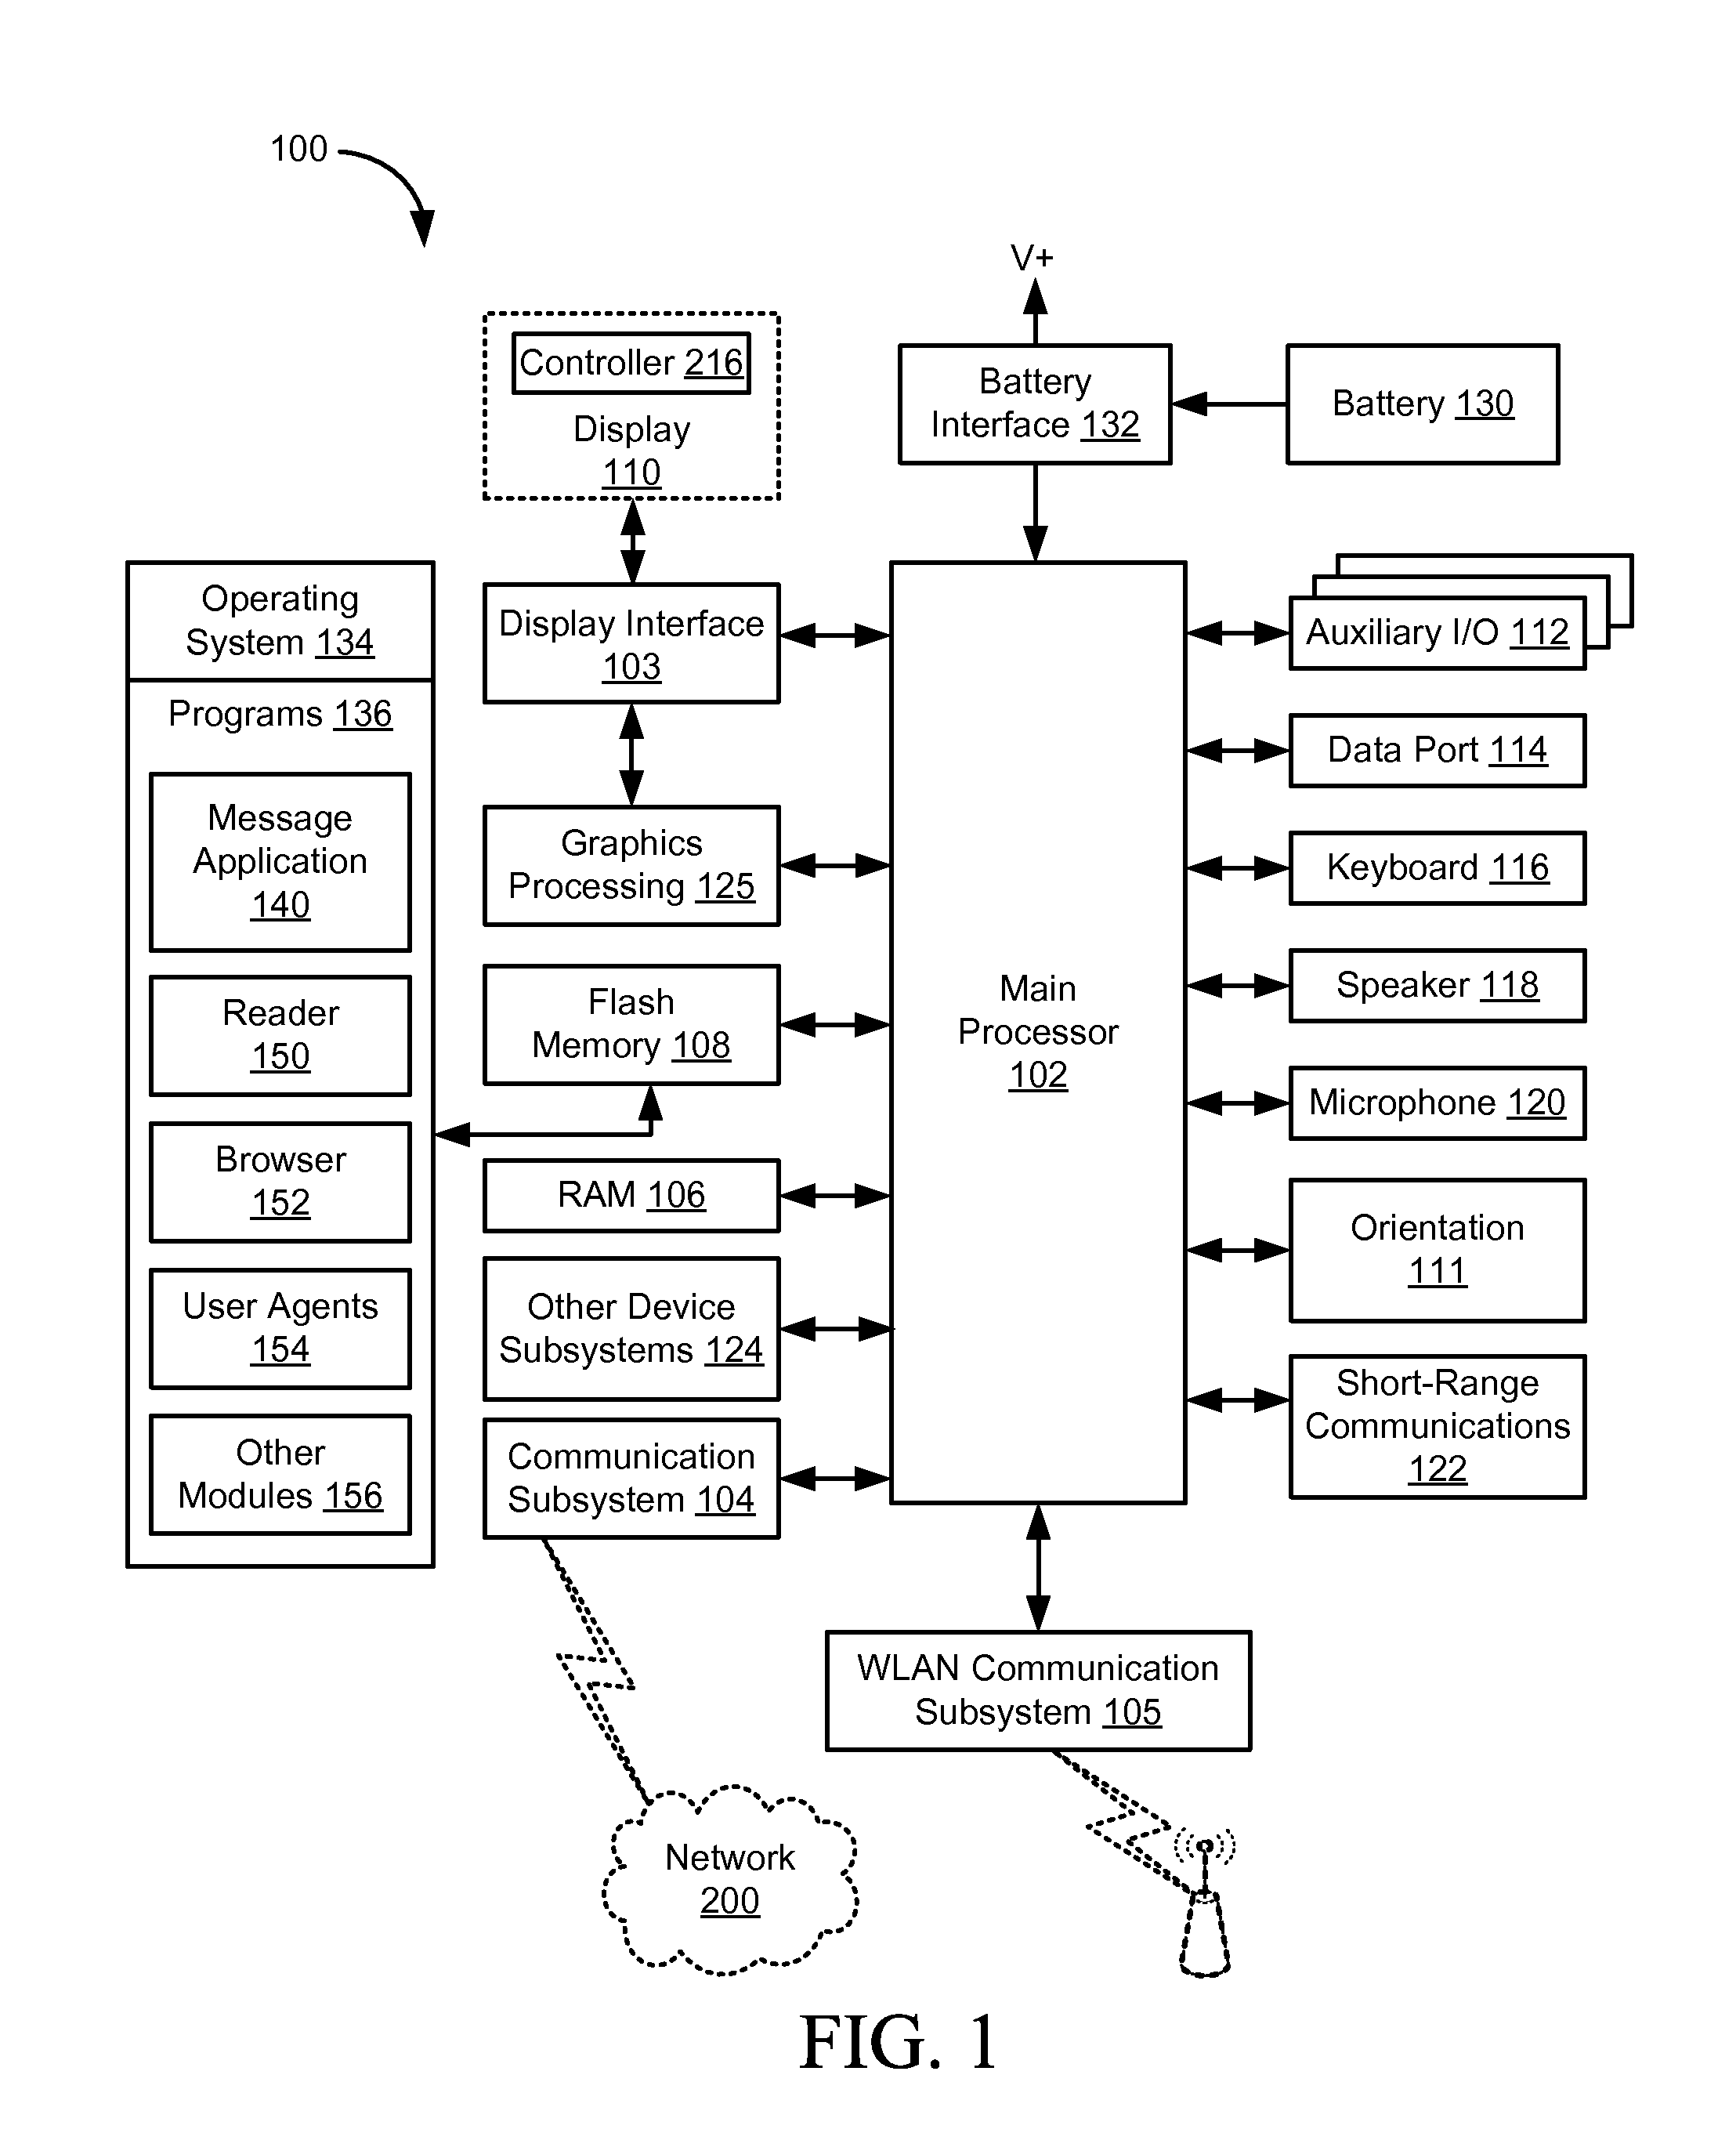 Accelerated compositing of fixed position elements on an electronic device